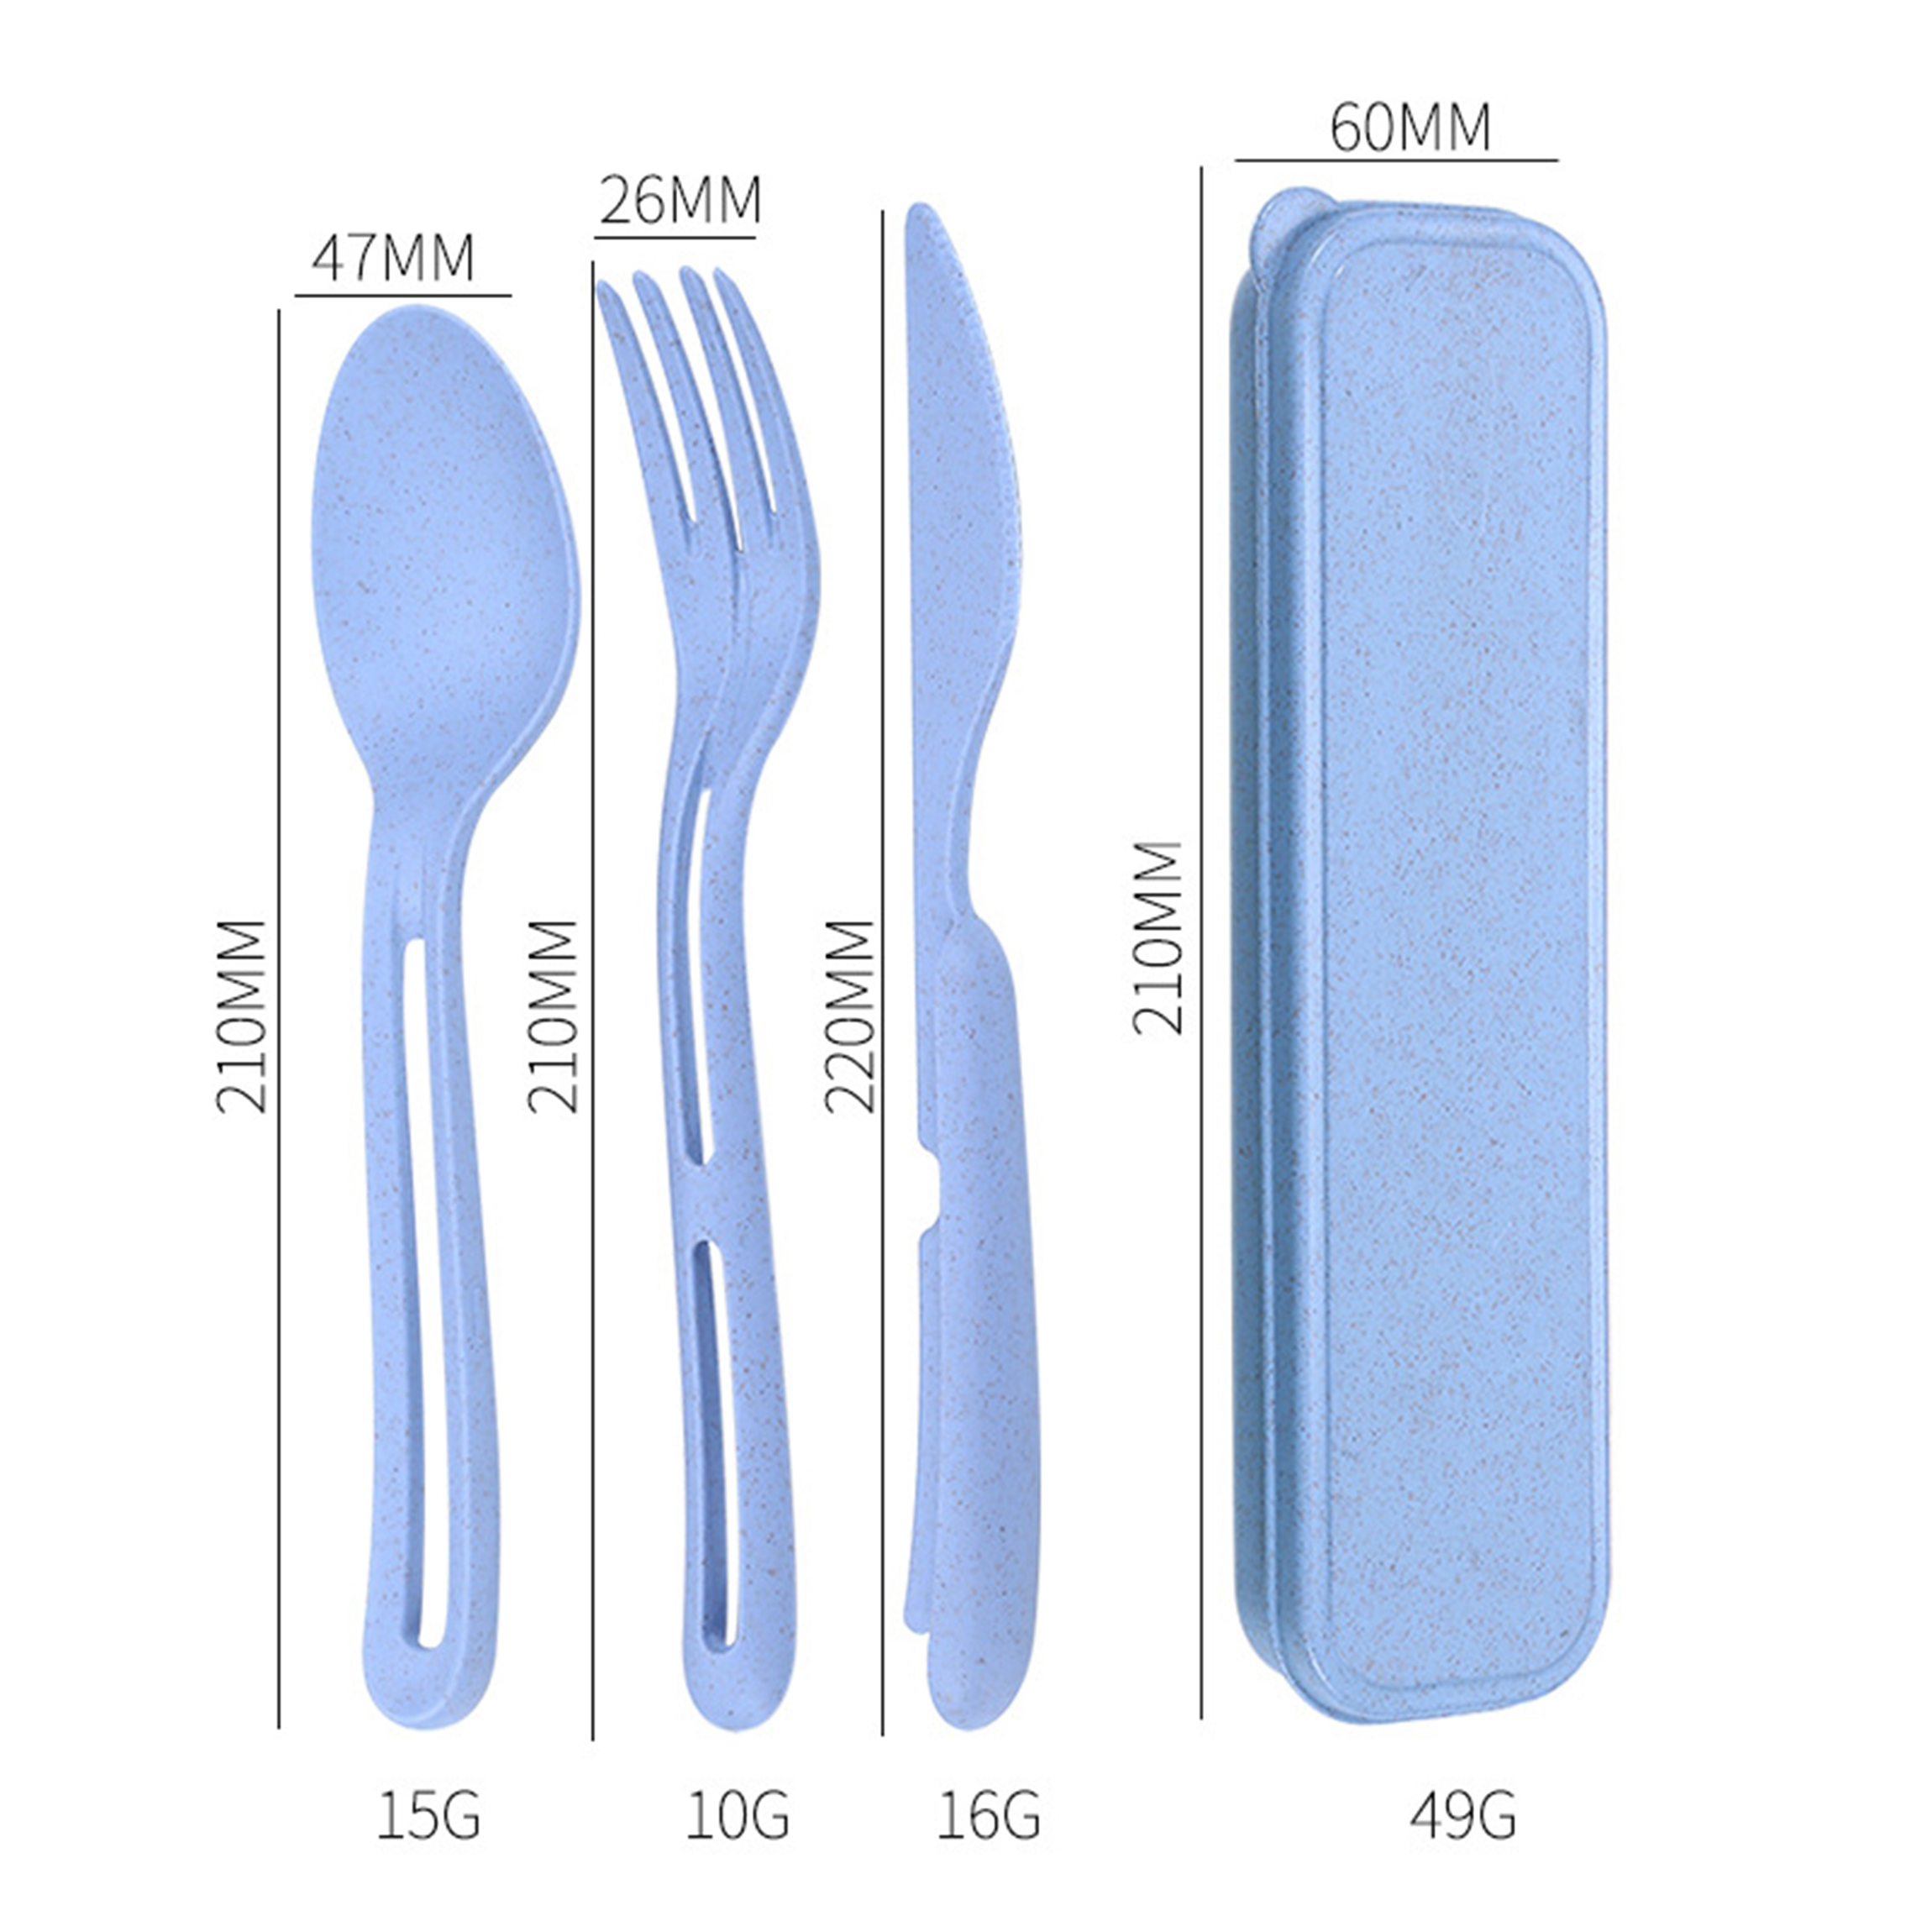 YDYTOP Ydytop Reusable Travel Utensils Set With Case, Blue Wheat Straw  Portable Fork Spoons Tableware, Eco-Friendly Bpa Free Cutlery F